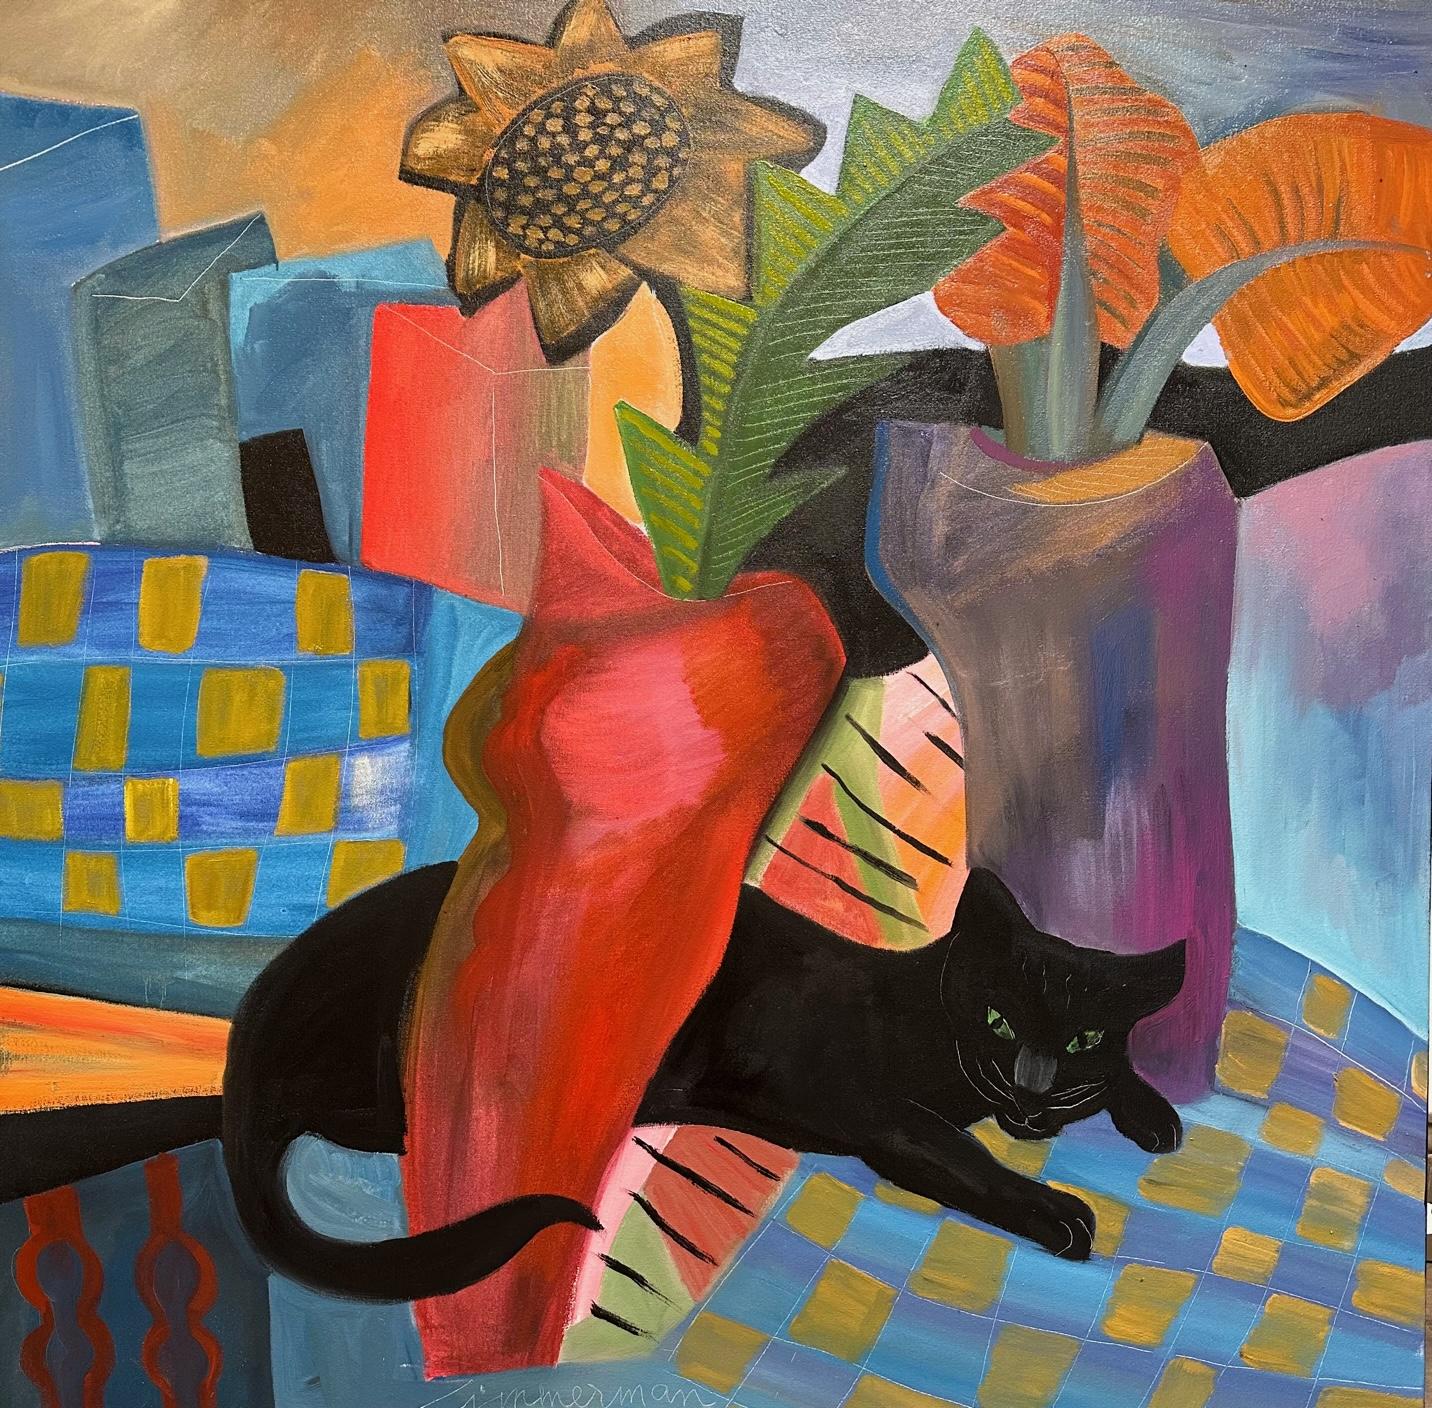 Red Vase Black Cat - Animal still life painting , Oil on canvas By Marc Zimmerman

This masterpiece is exhibited in the Zimmerman Gallery, Carmel CA.


Marc Zimmerman creates playful paintings, whether deep mysterious jungle or delightfully